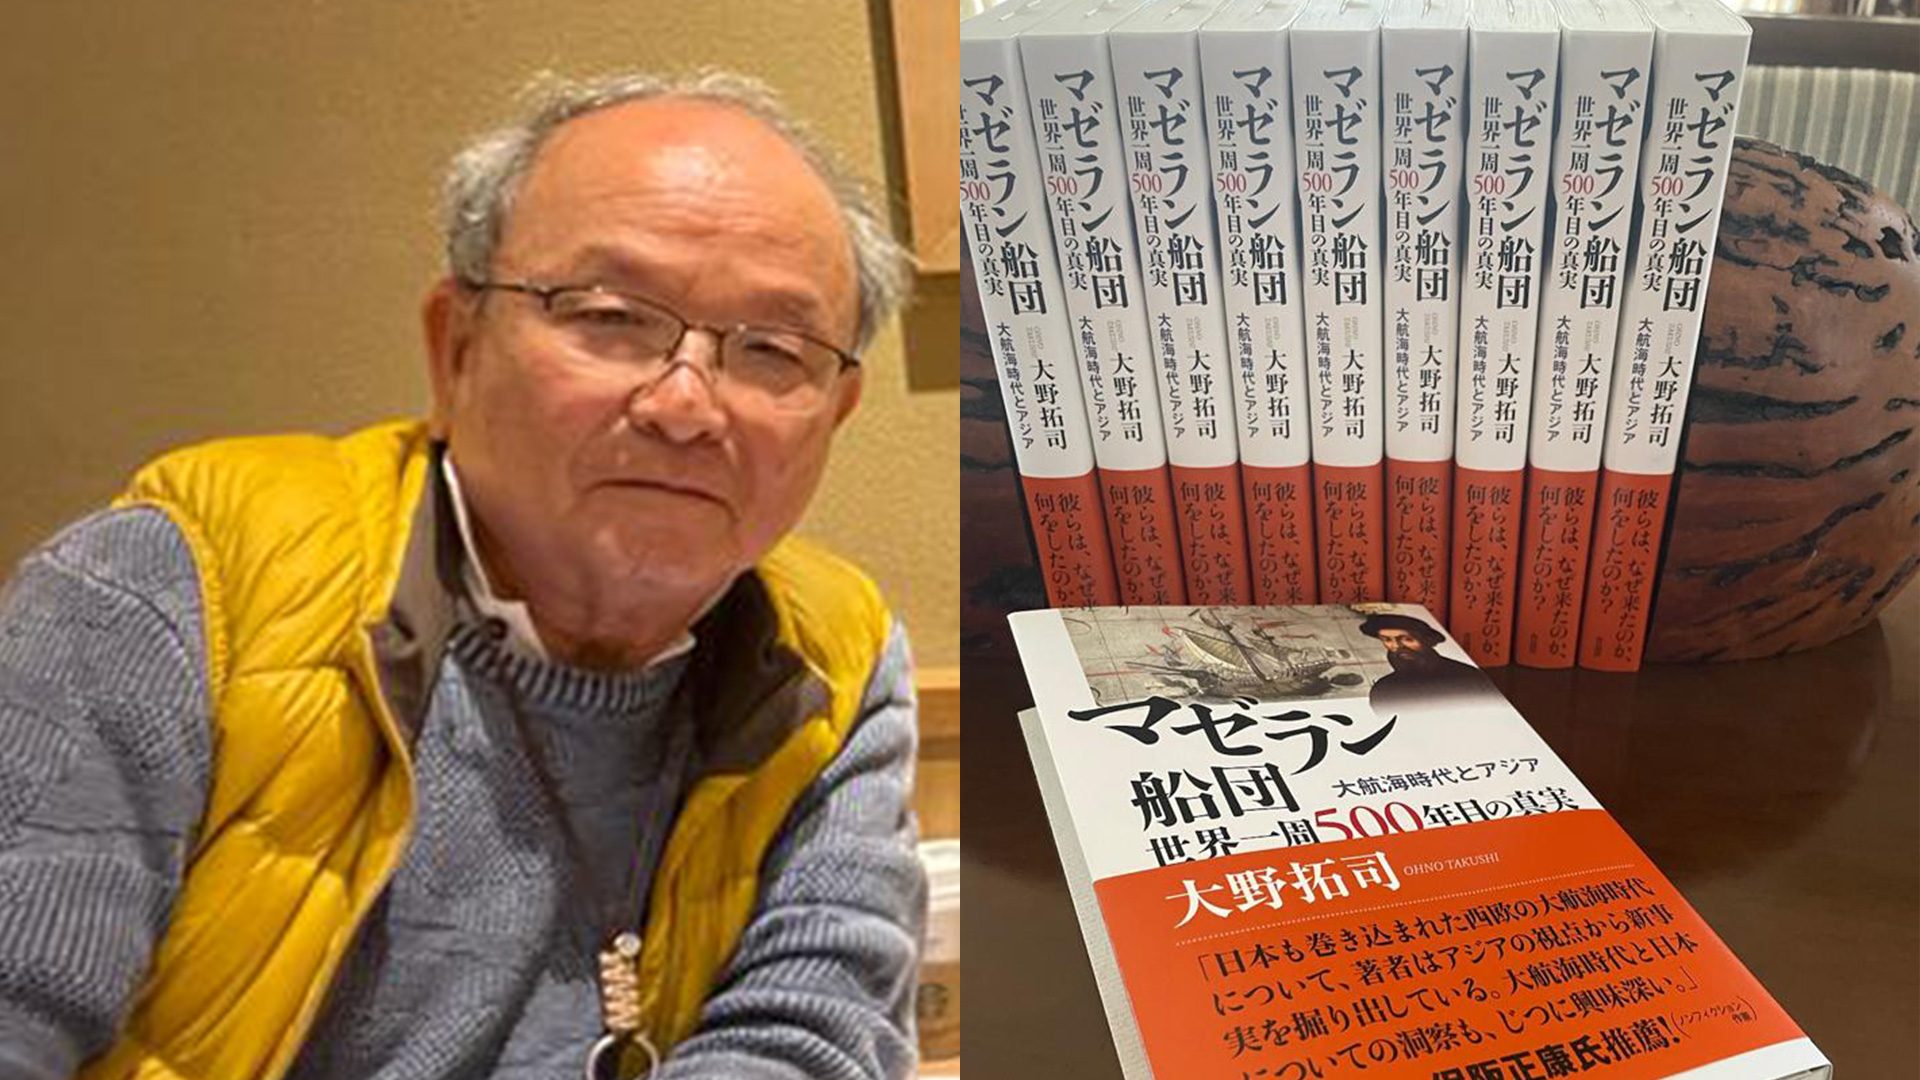 Philippines is in the heart: A Japanese Filipinologist writes a book on the import of Magellan’s voyage